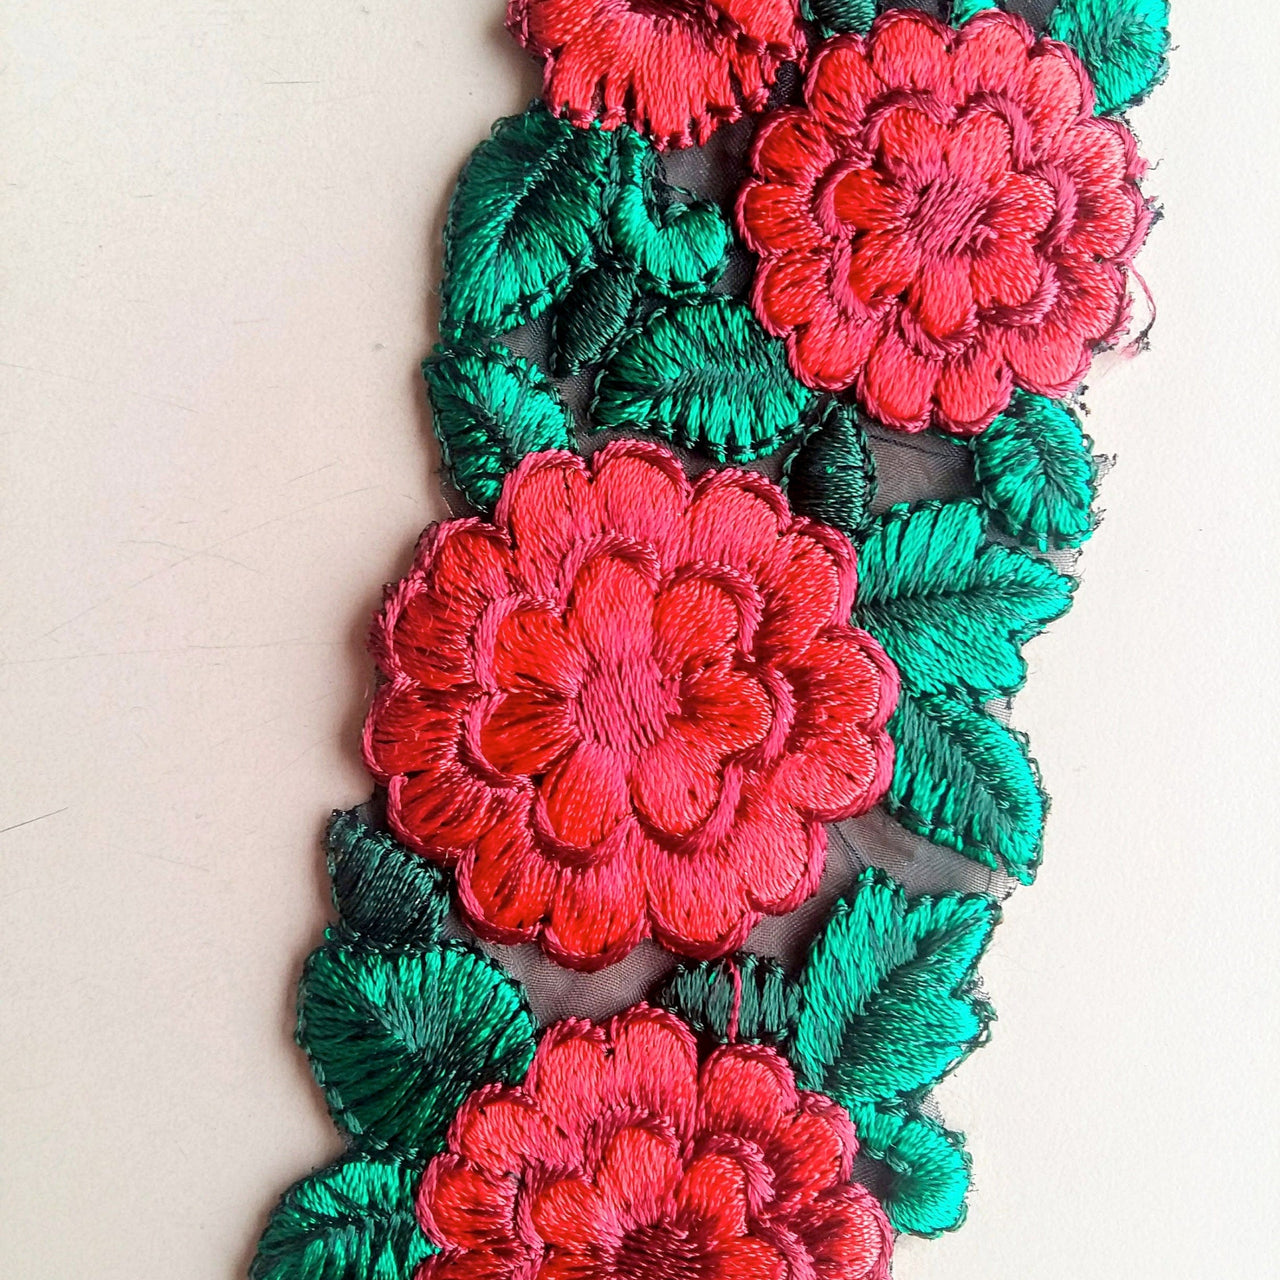 Black Fabric Trim With Red And Green Floral Embroidery, 50mm wide - 200317L332